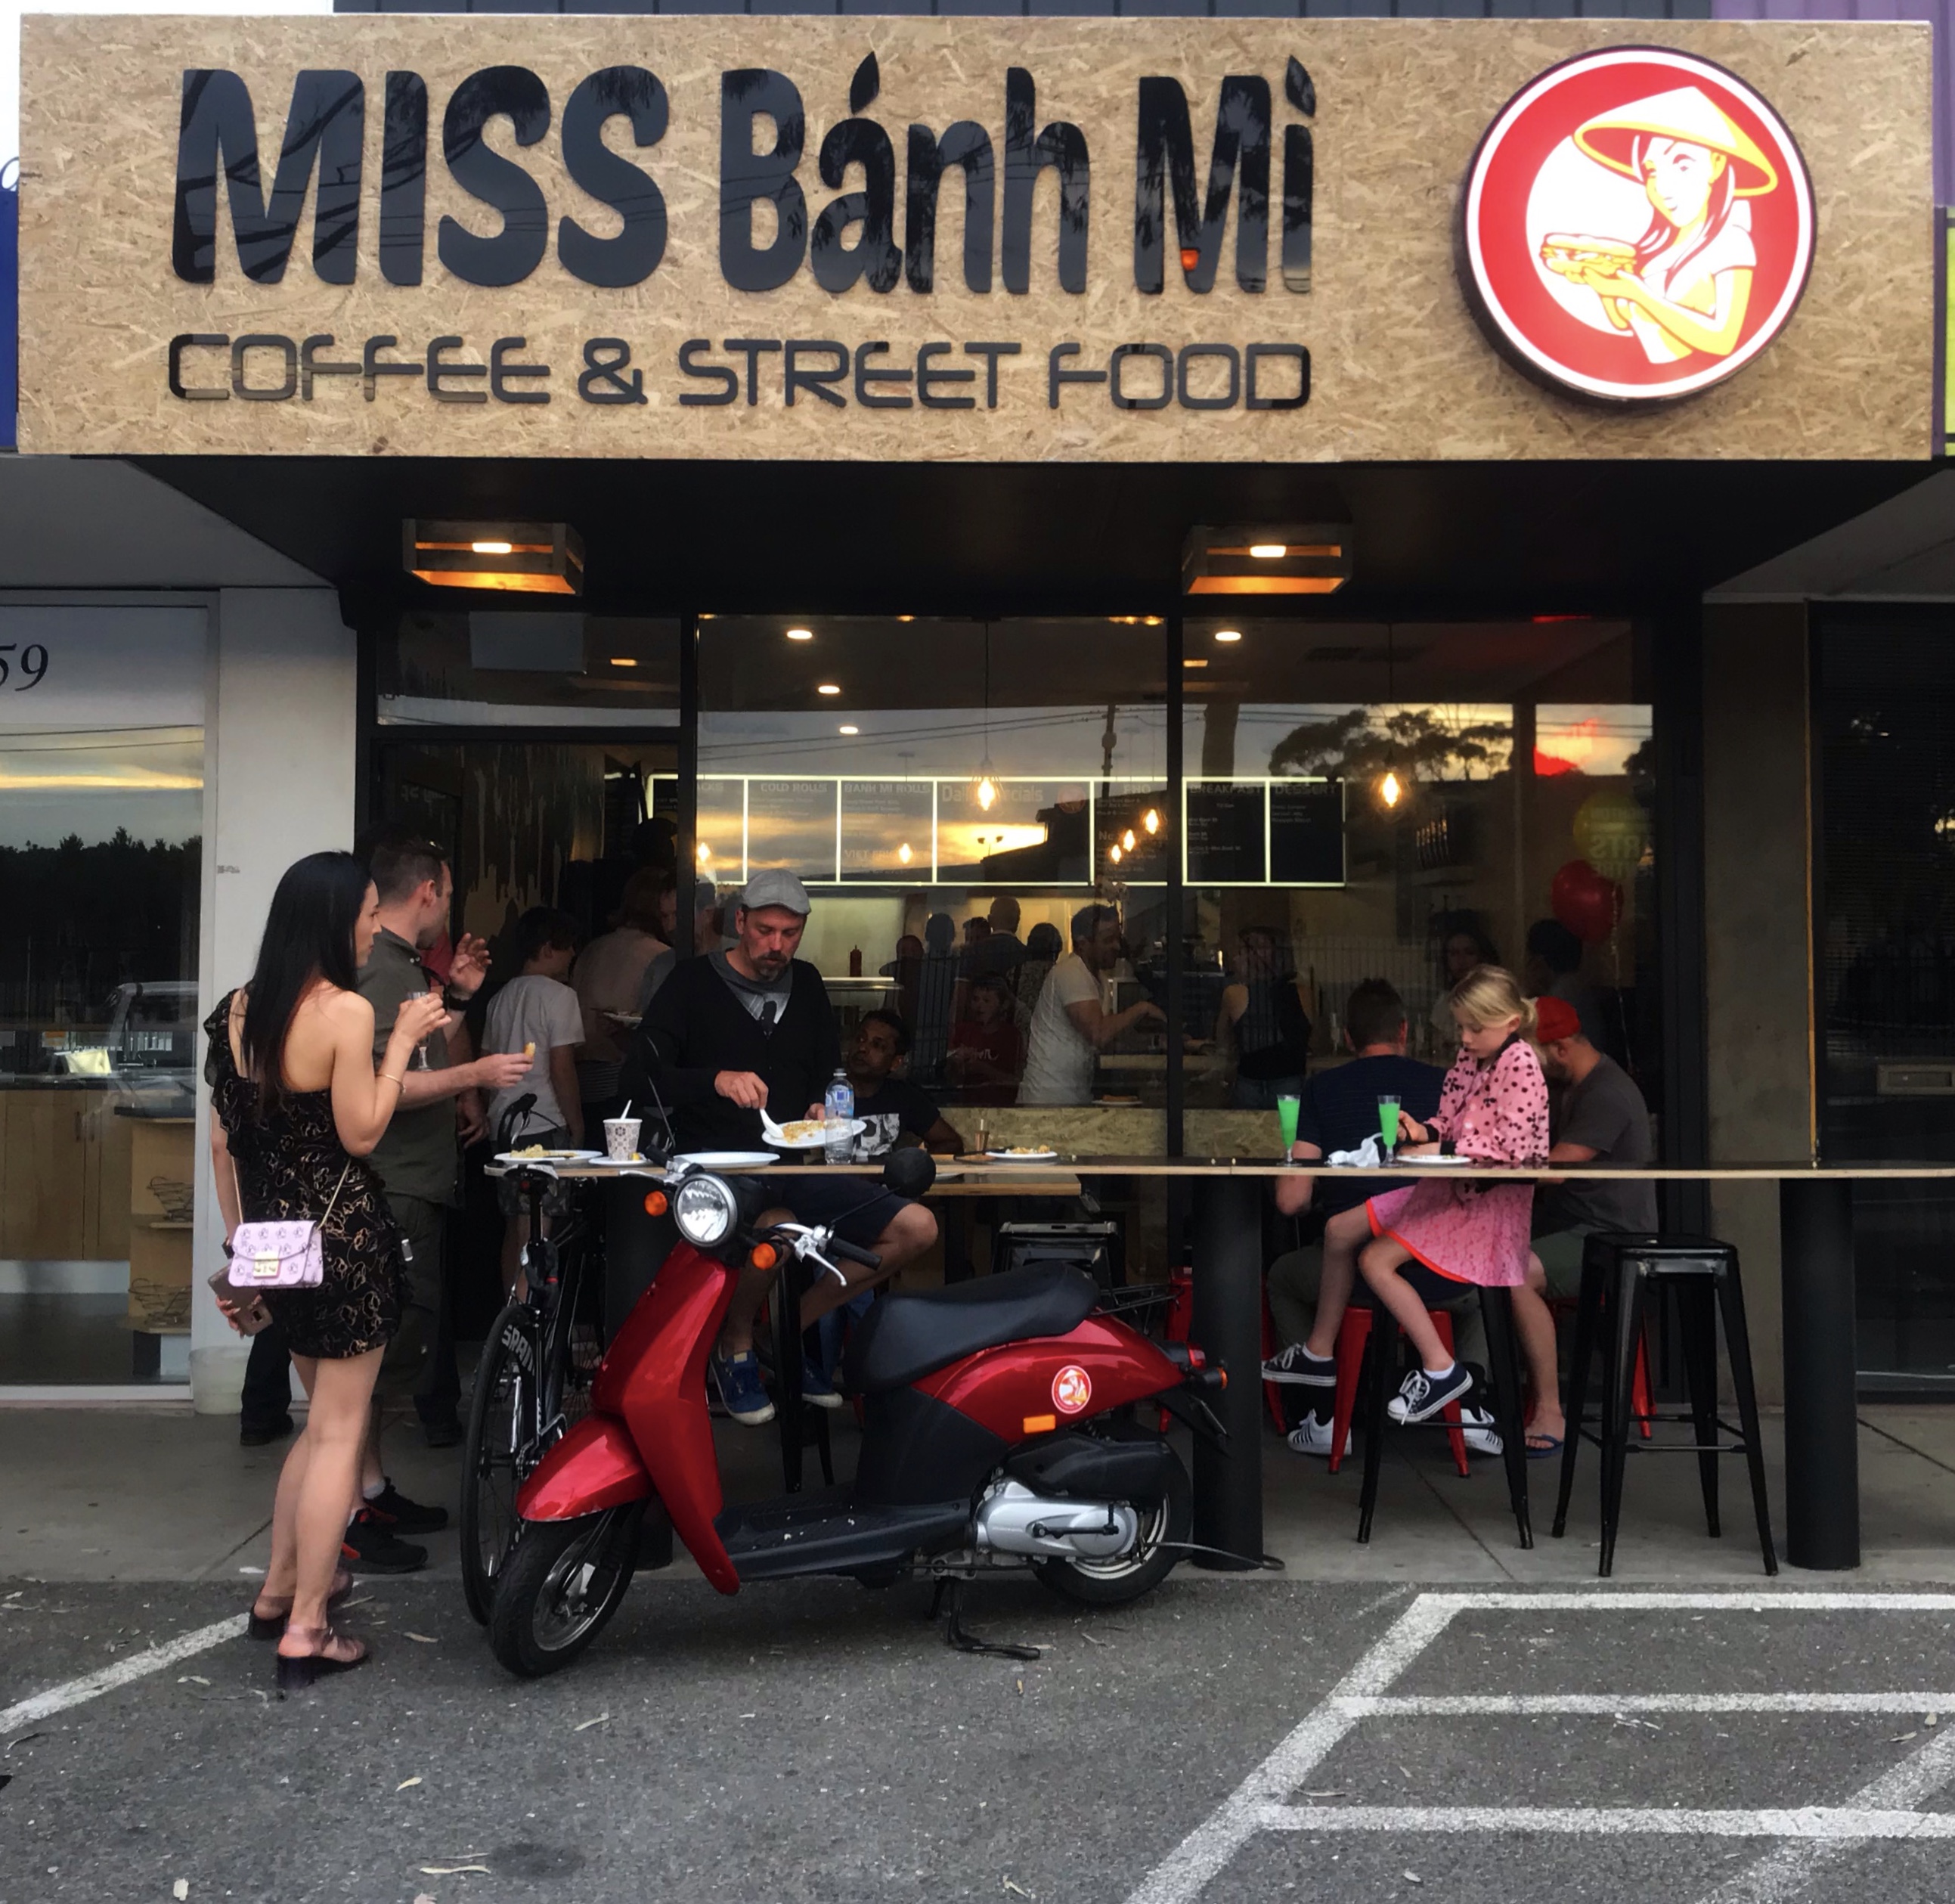 'A hip Vietnamese Street Food & Coffee shop, serving upmarket eats including Banh Mi and Pho. Made fresh with local ingredients.'